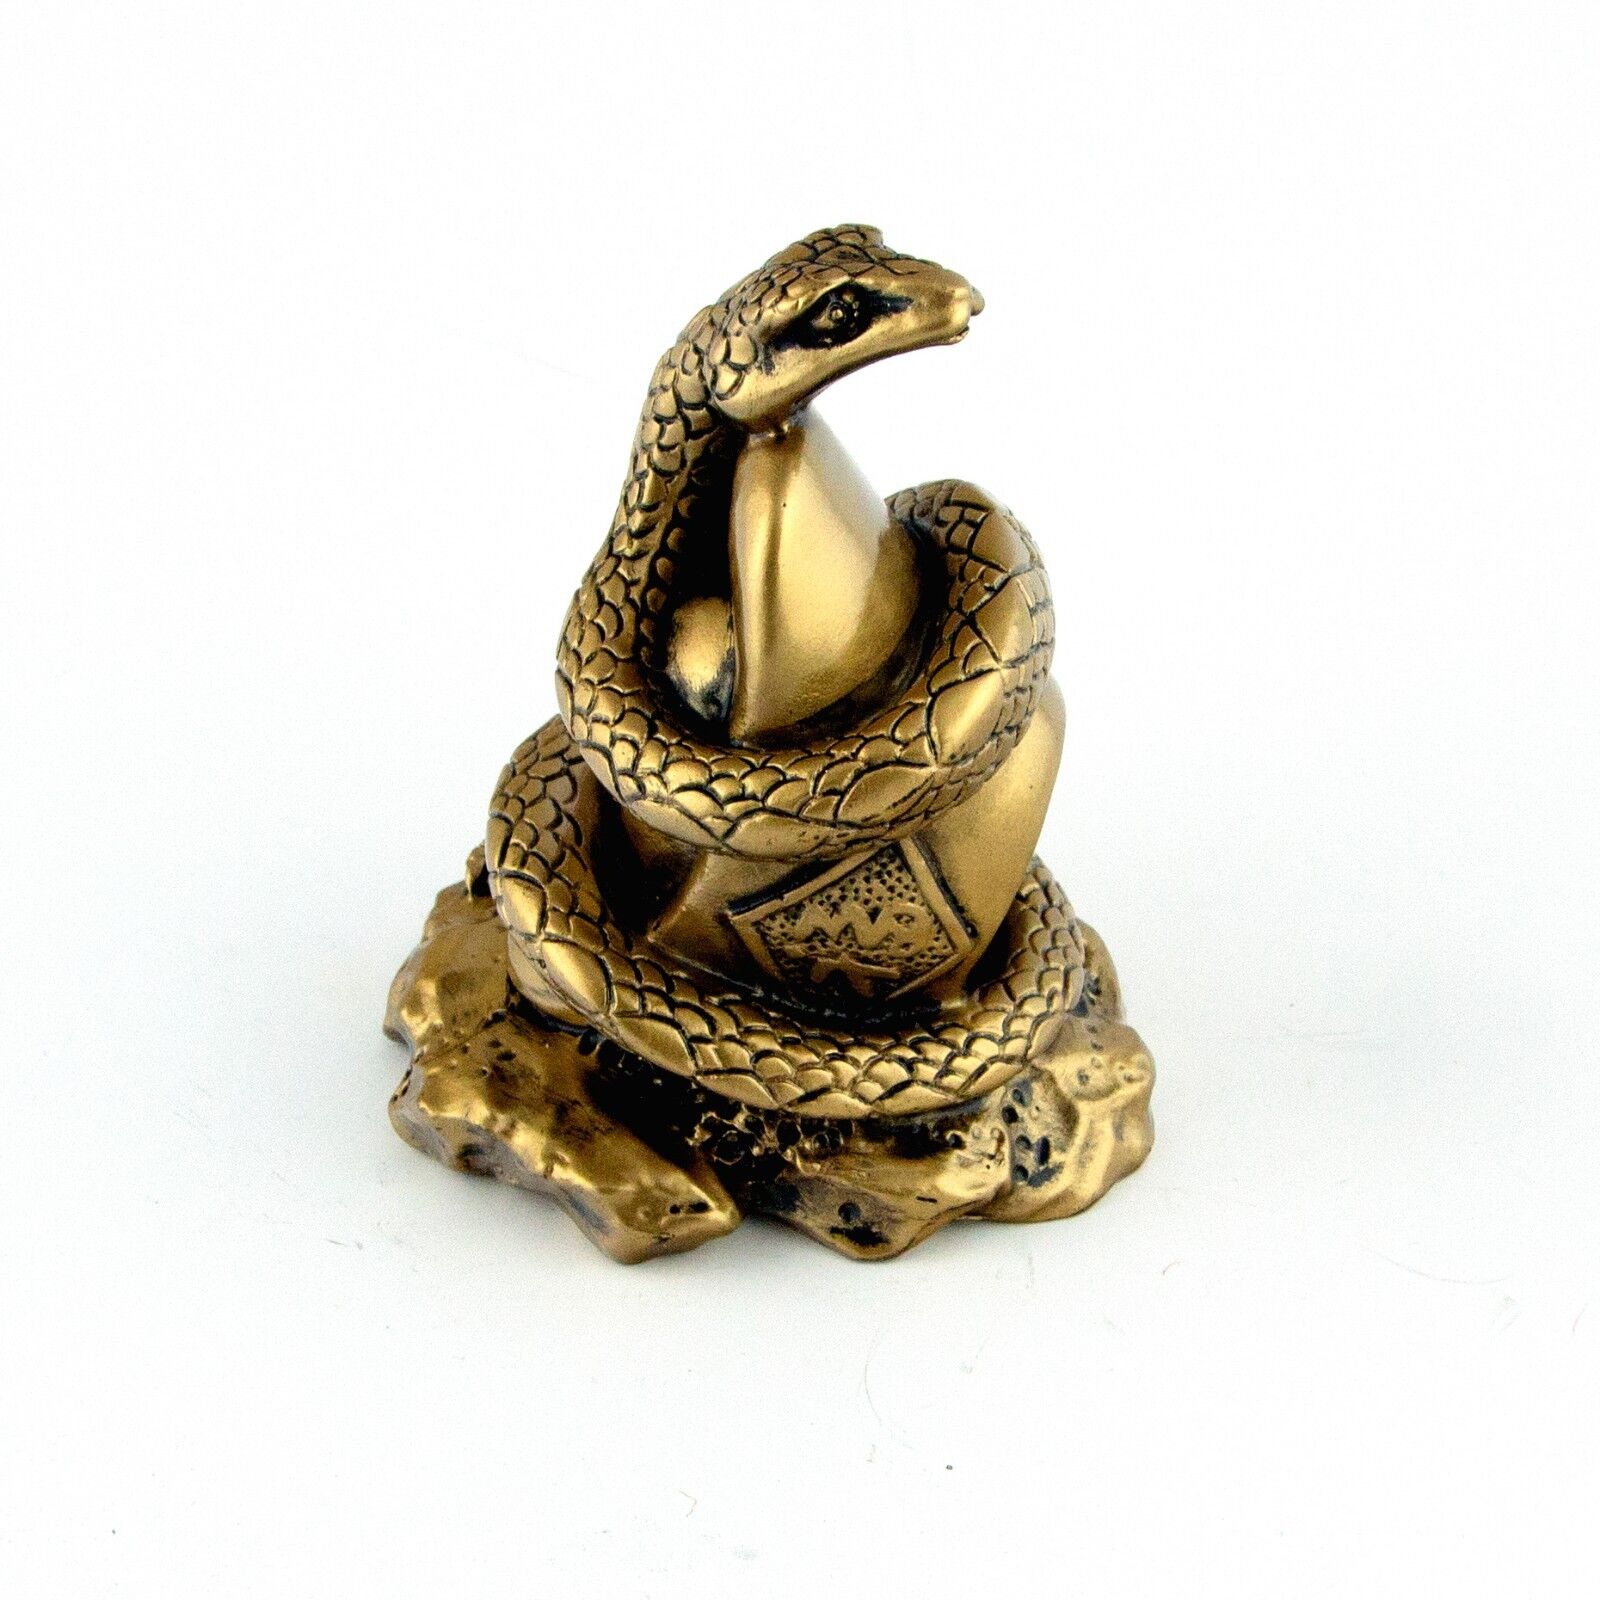 Chinese Zodiac Golden Snake Statue Figurine Feng Shui Animal Bronze Color 4in